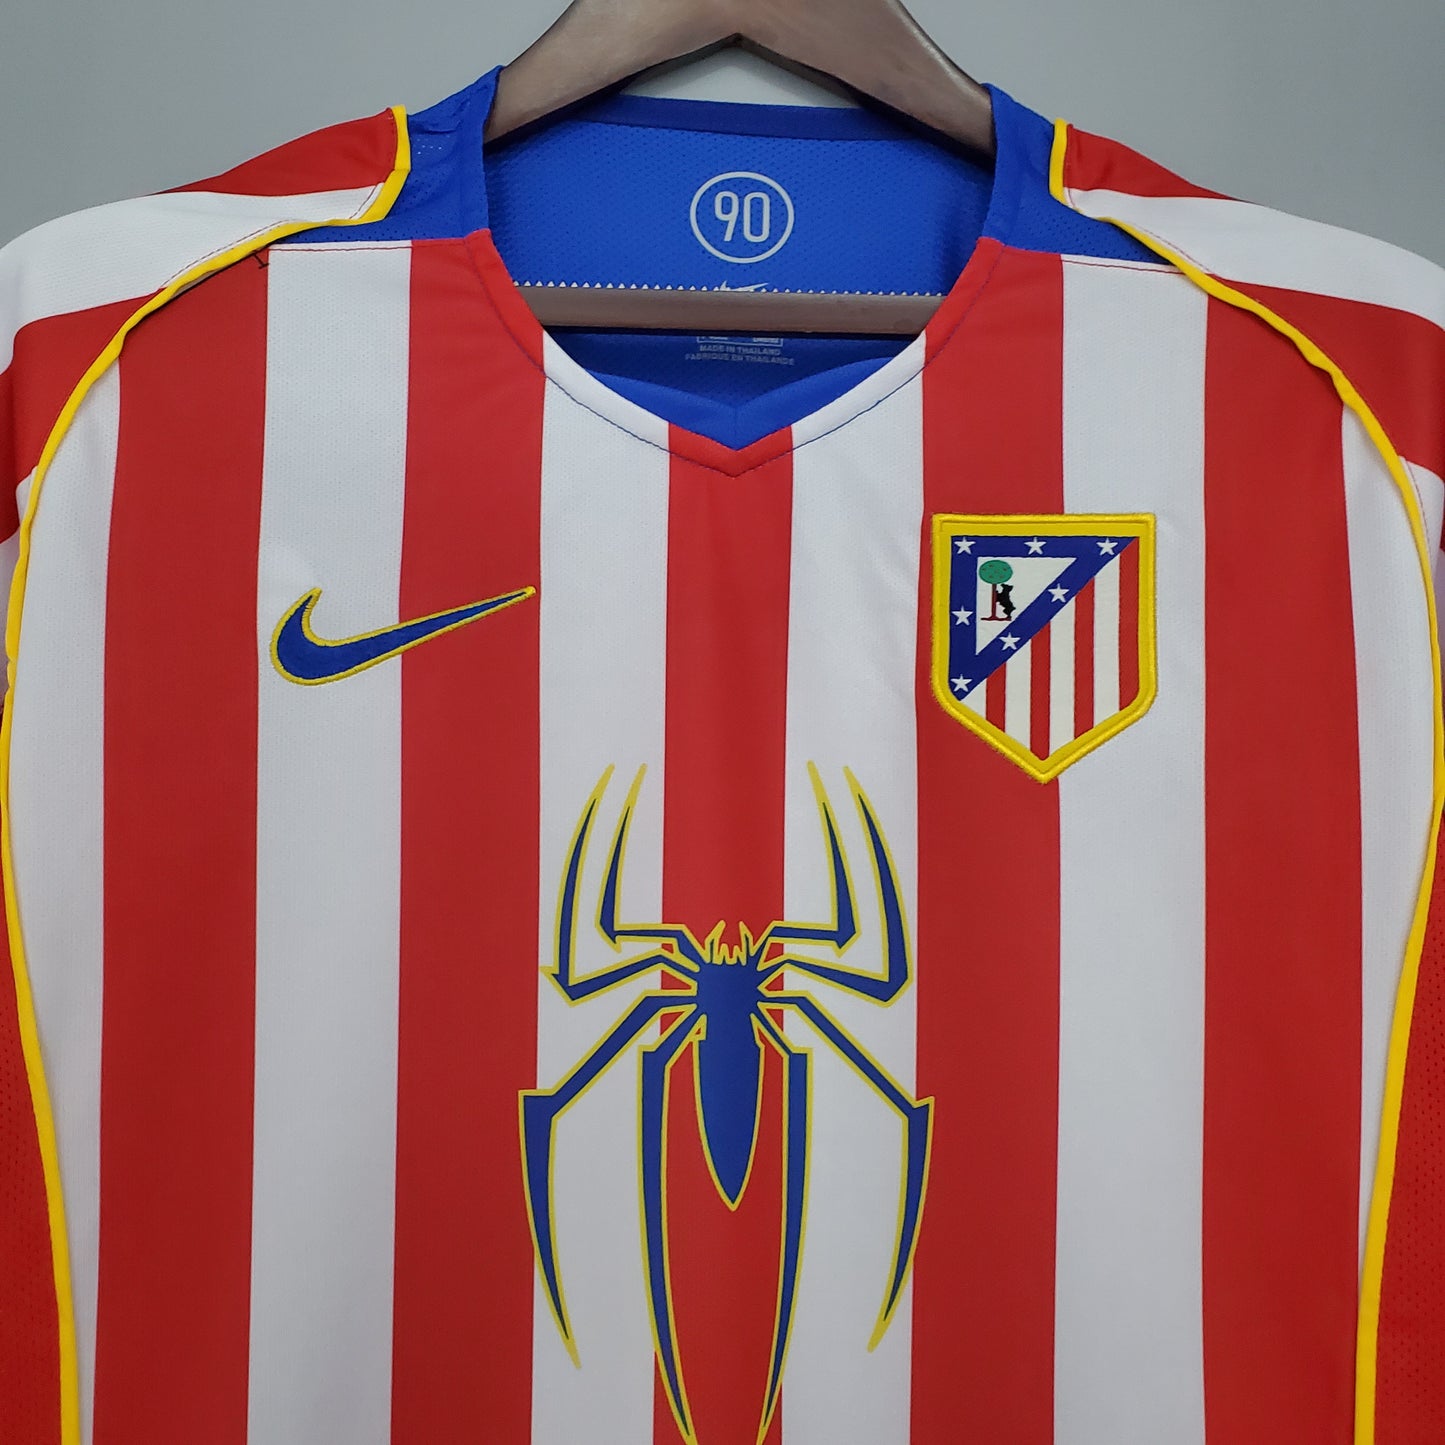 Athletic Madrid 2004/05 Home Jersey